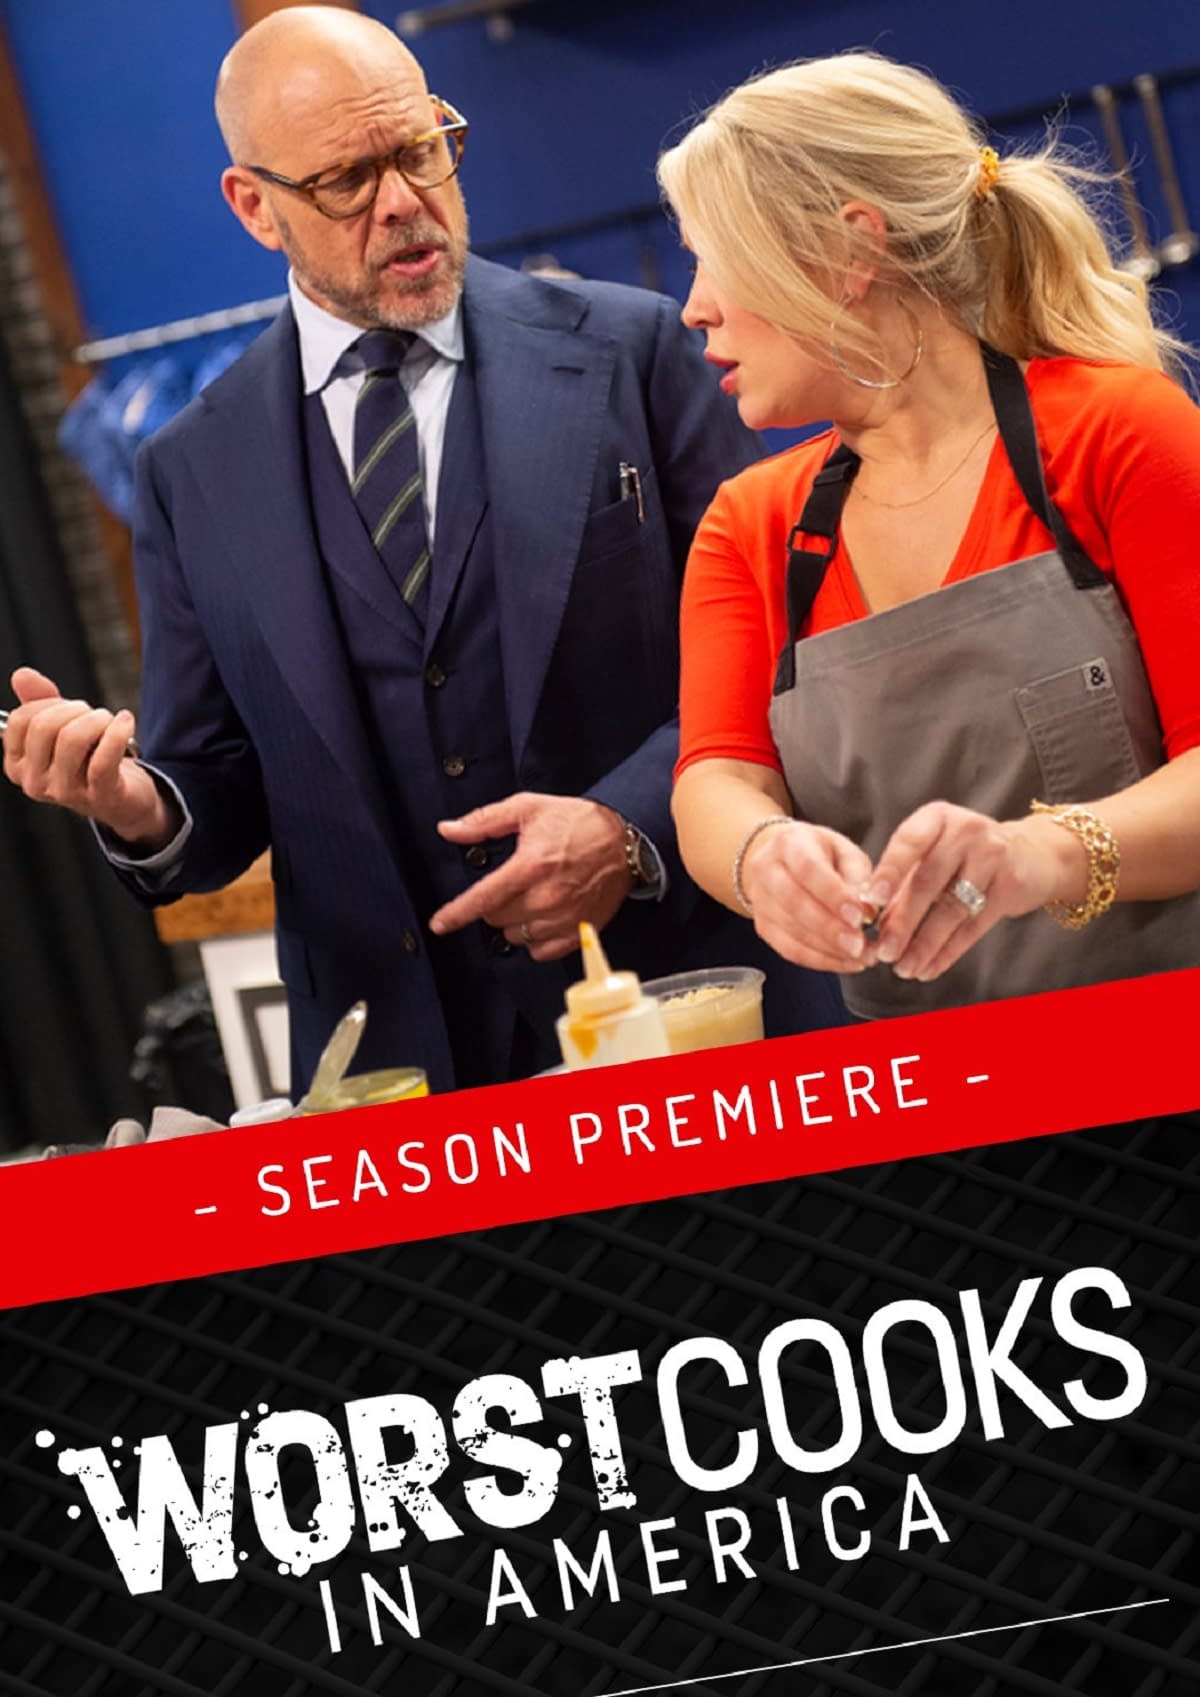 "Worst Cooks in America" Episode 1 "Bottom's Up!": Started from the Bottom, Now We're&#8230; Still There? [SPOILER REVIEW]